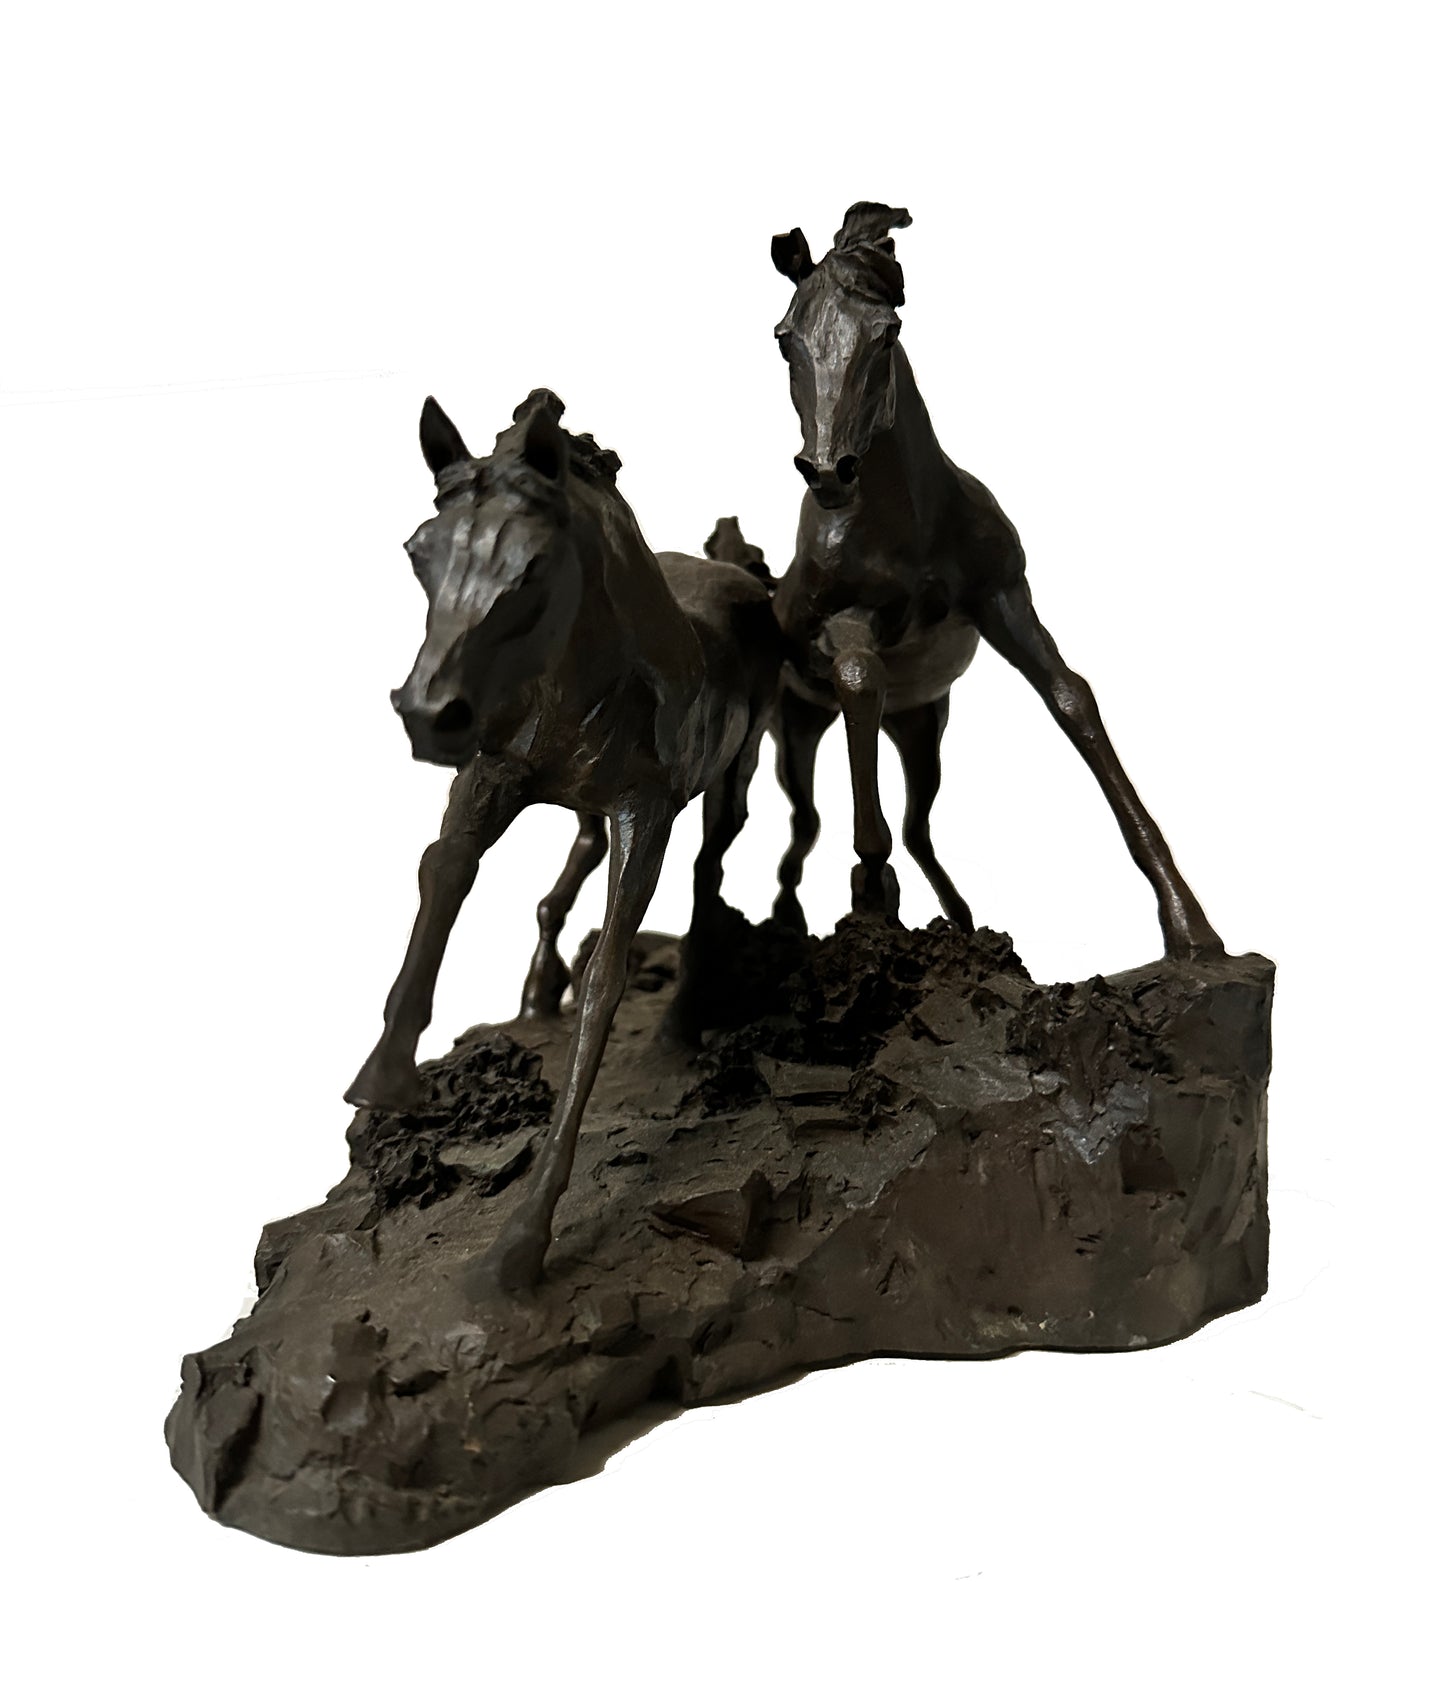 Clay Sculpture of Two Horses - "Morning on the Montana Plains" by Lanford Monroe